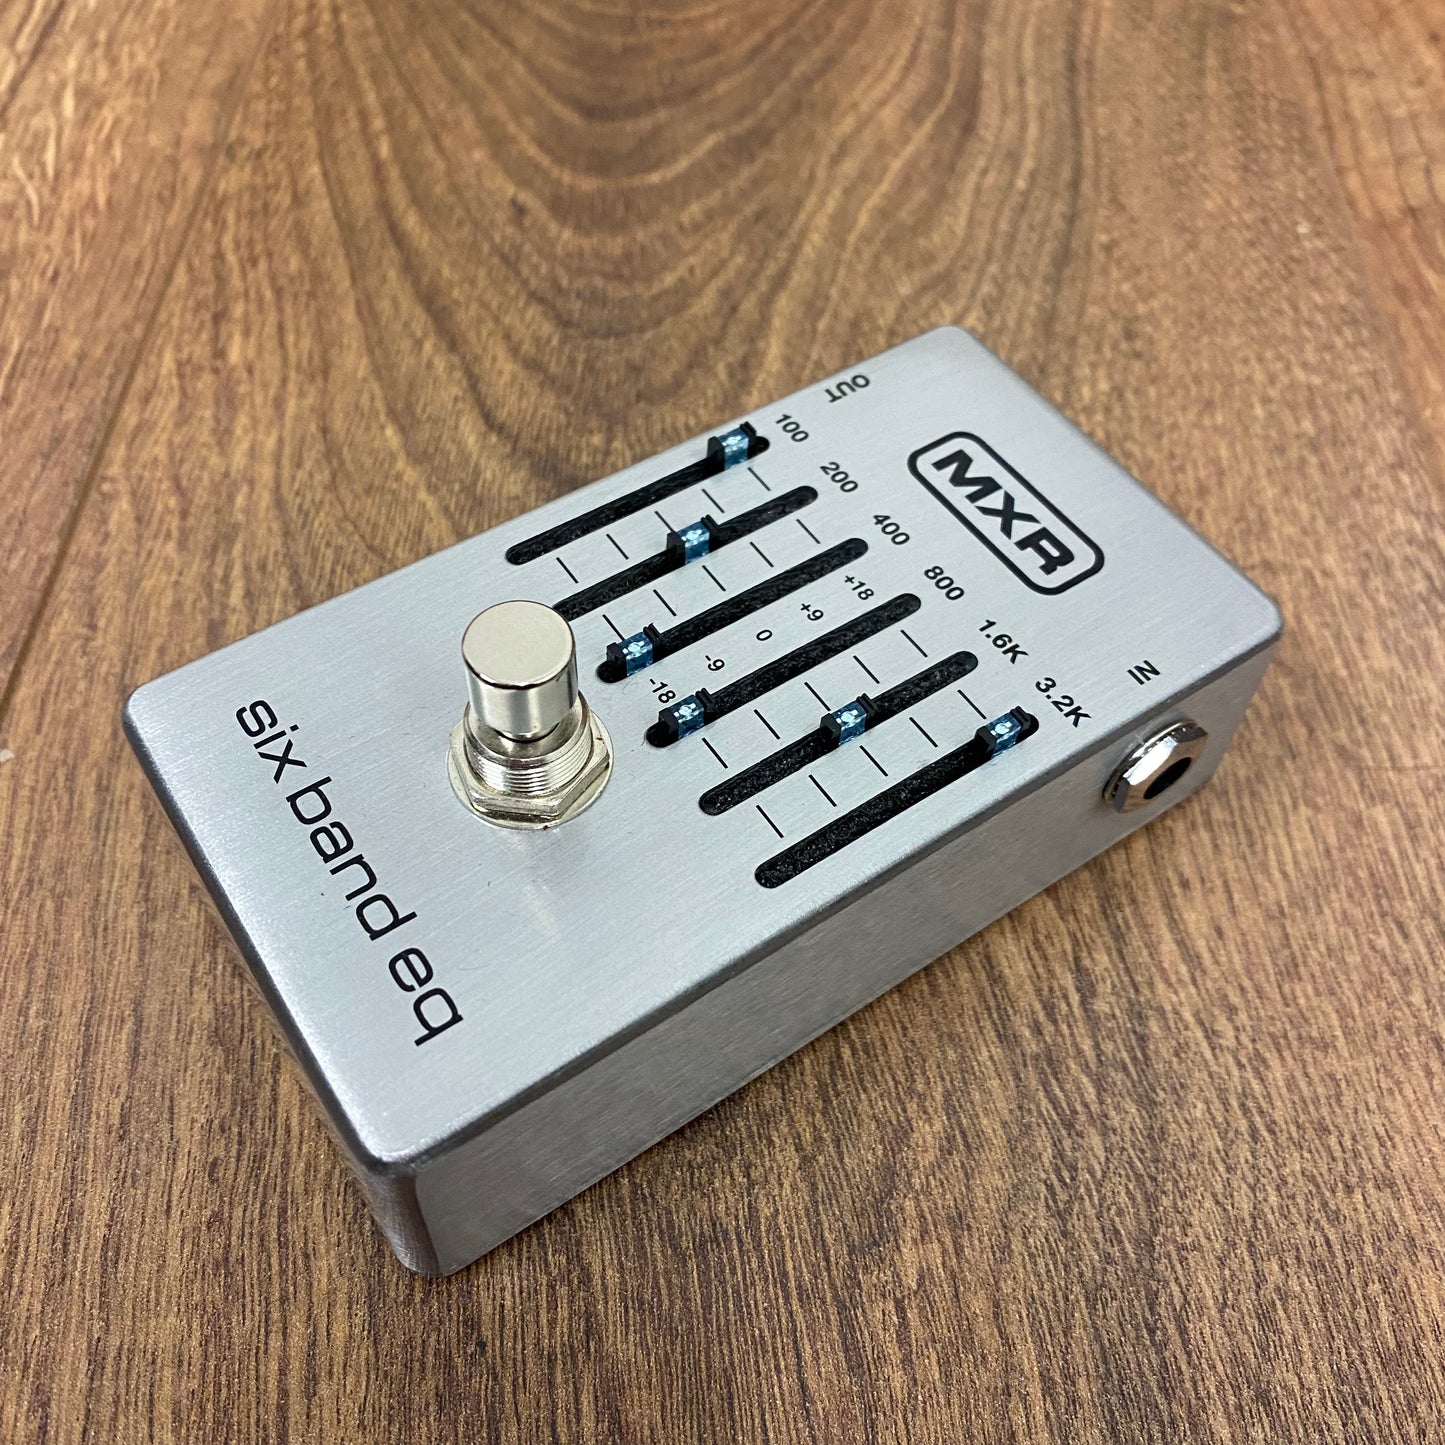 Pre-Owned MXR 6 Band Equalizer Pedal